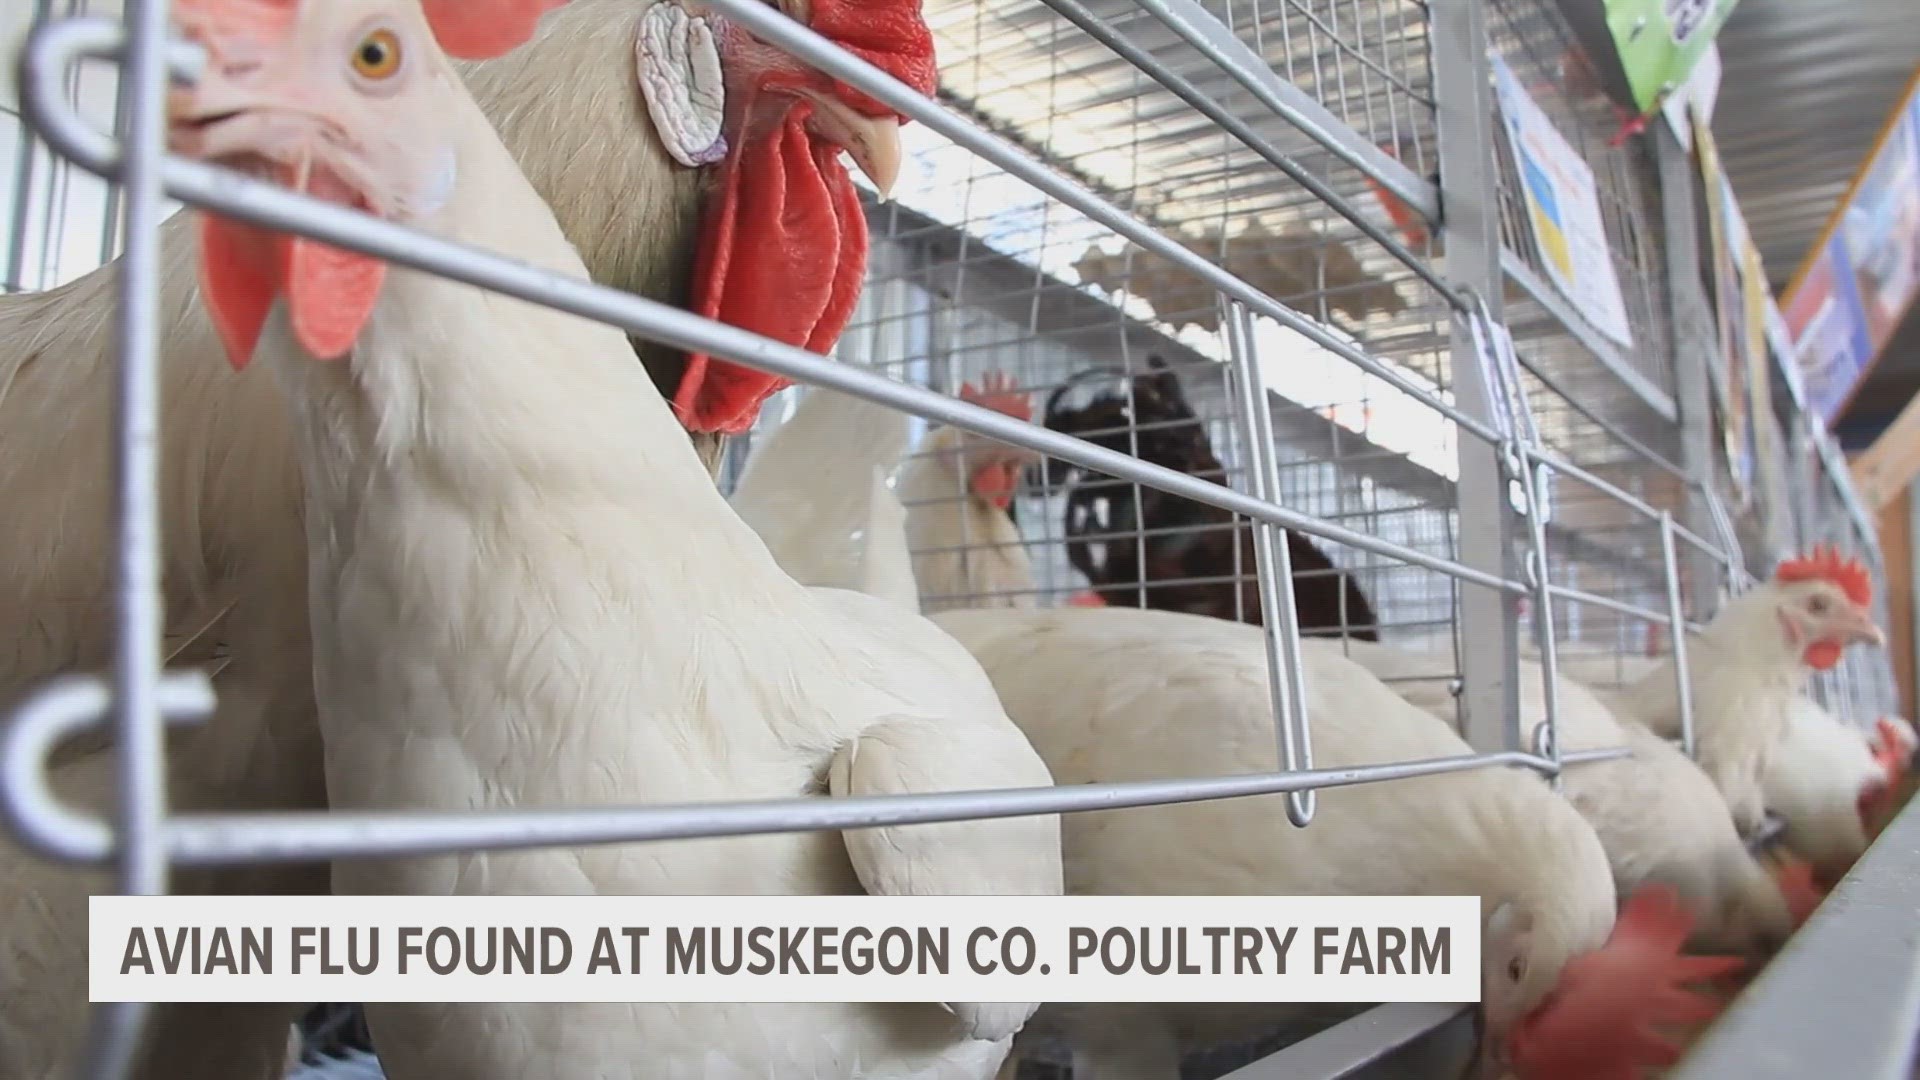 The bird flu was first detected in Michigan in 2022 and this is the second time it has been found in Muskegon County.